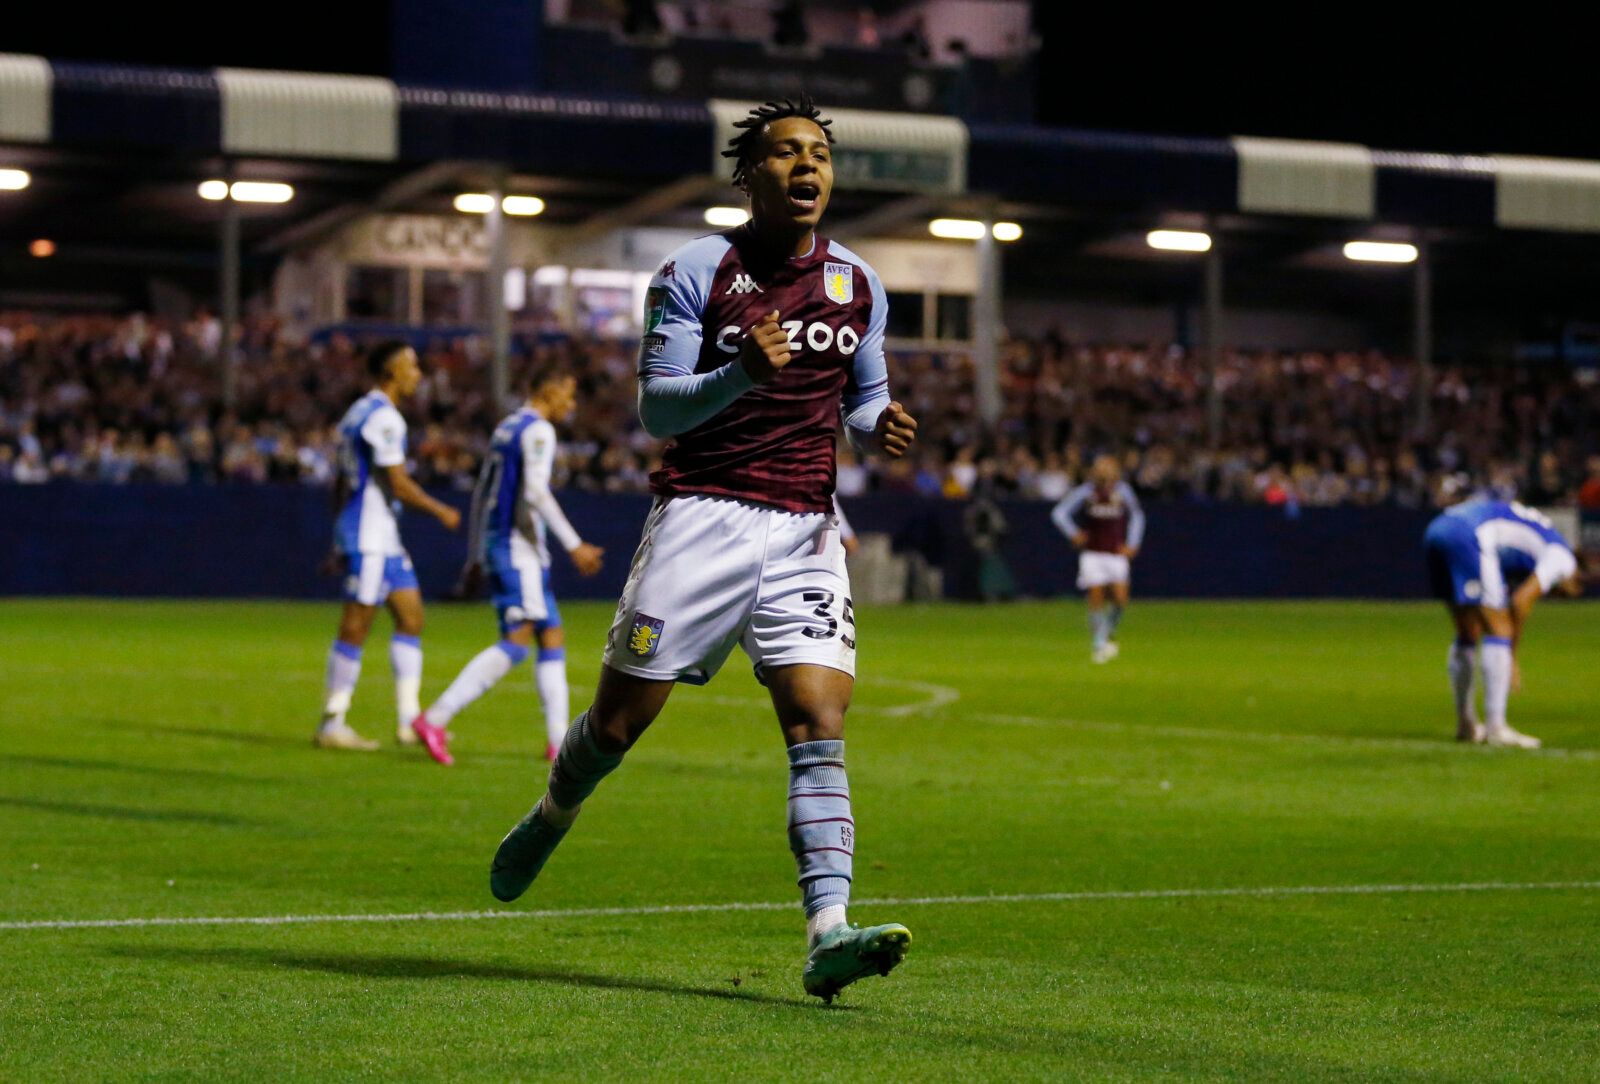 Soccer - England - Carabao Cup Second Round - Barrow v Aston Villa - Holker Street, Barrow-in-Furness, Britain - August 24, 2021 Aston Villa's Cameron Archer celebrates scoring their sixth goal and his hat-trick Action Images via Reuters/Ed Sykes